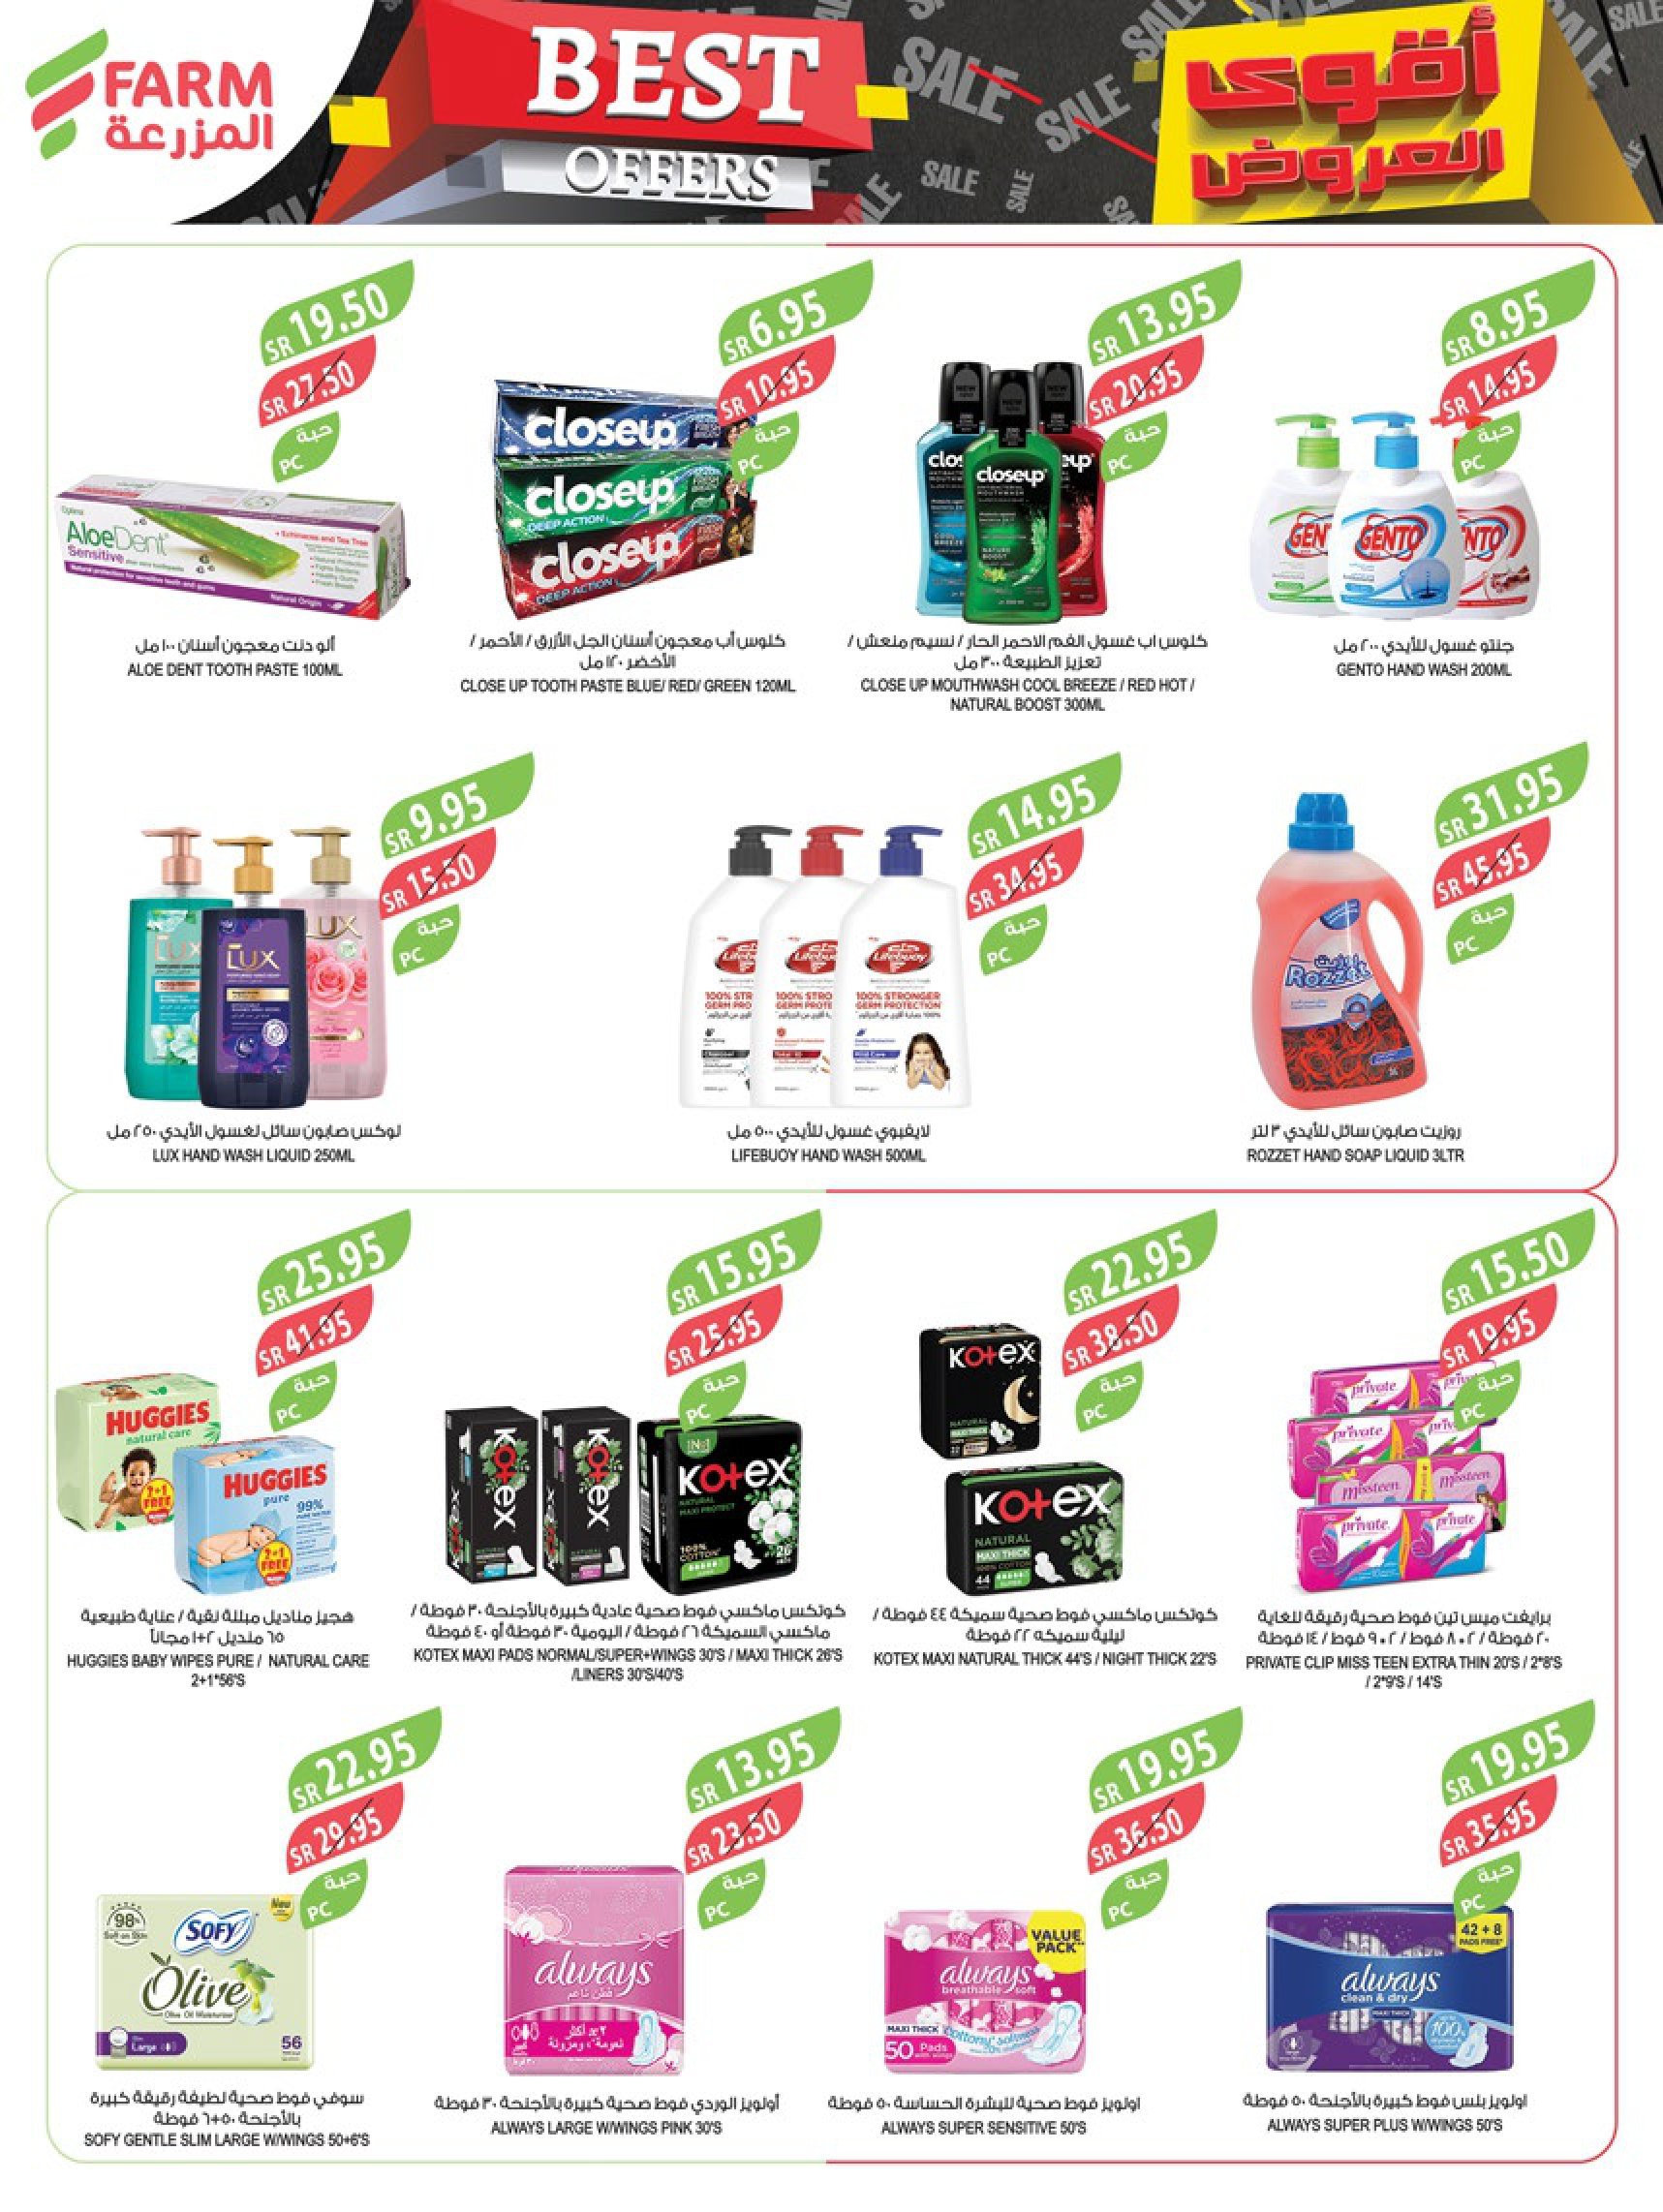 Page 36 at new leaflet for Best Offers at Farm jeizan najran abu areesh abha